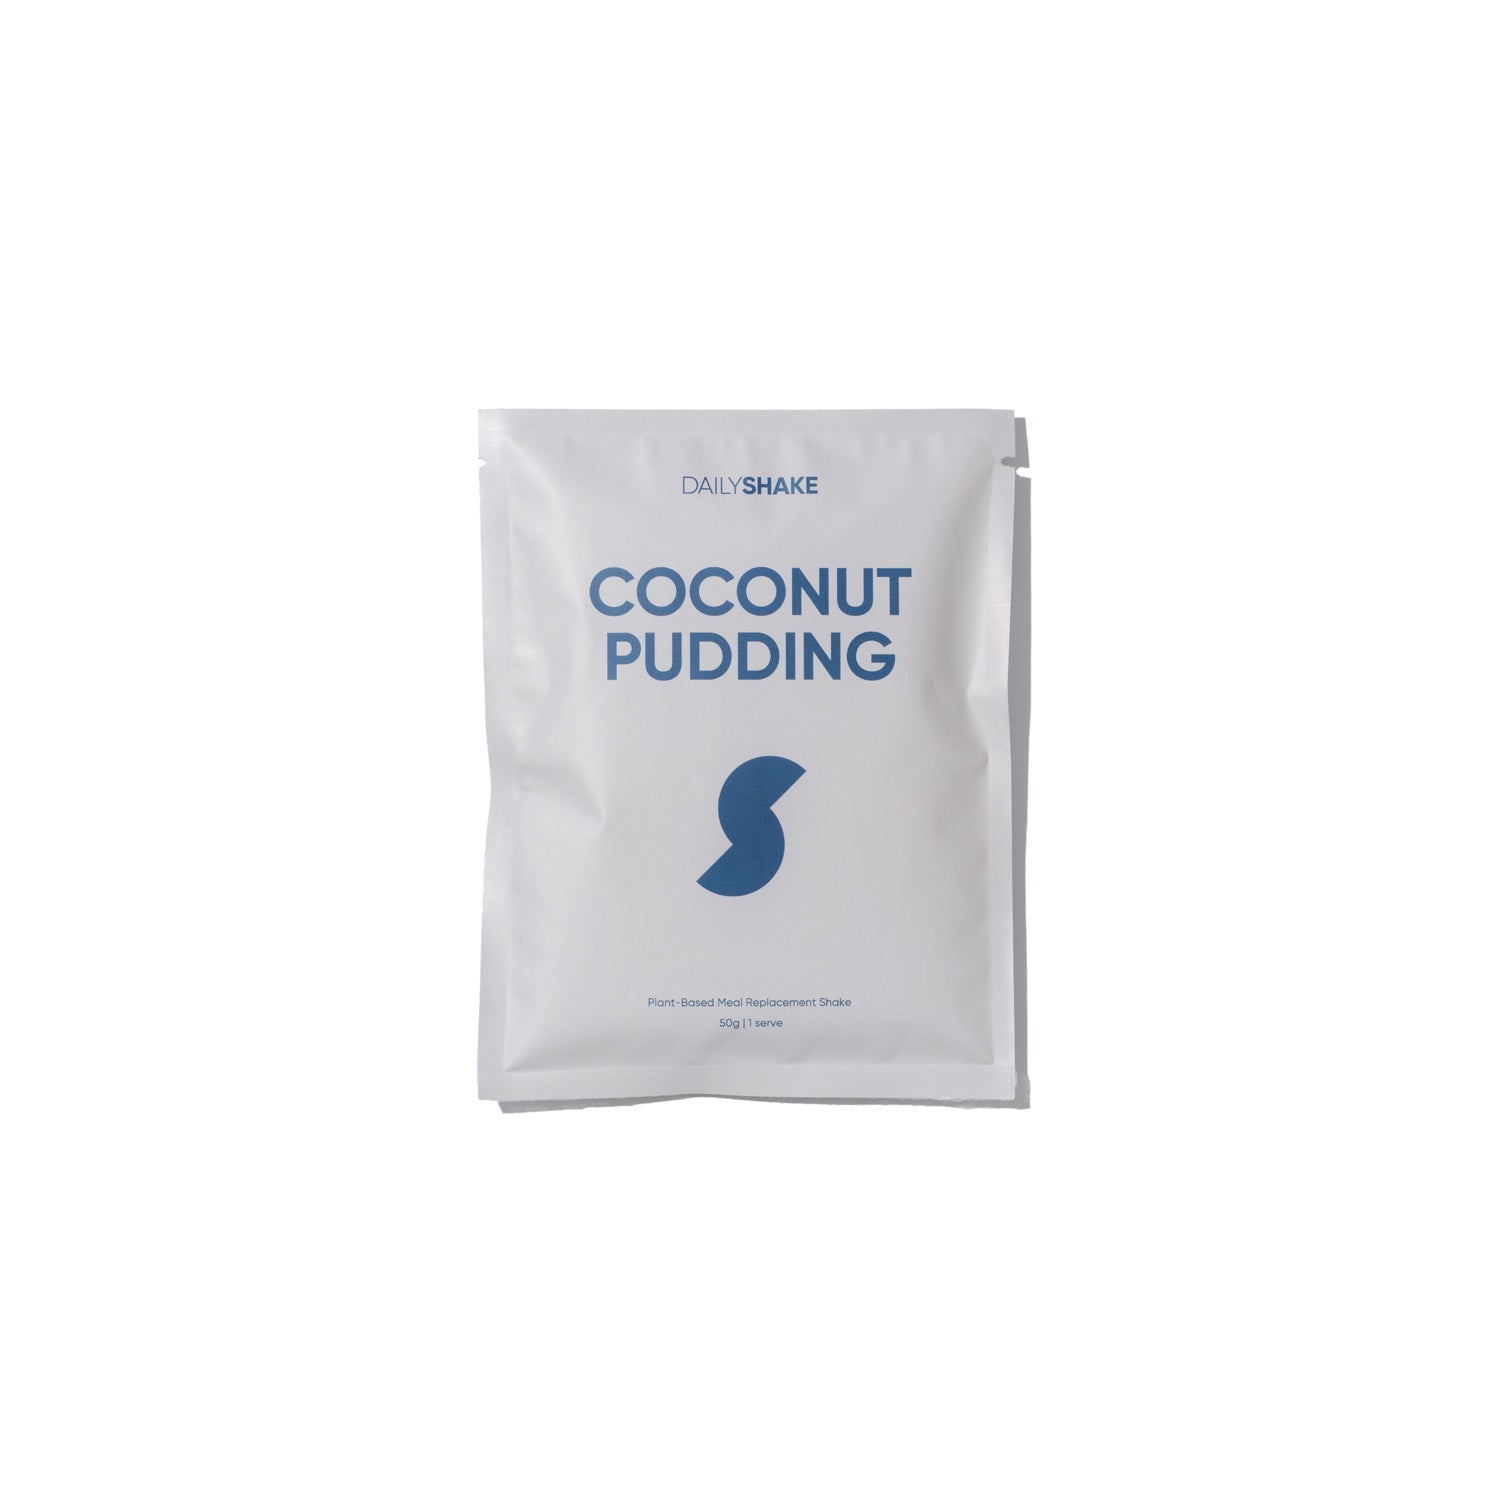 Coconut Pudding Daily Shake - Premium Meal Replacement Shakes 10 x Coconut Pudding Single Sachet Pack